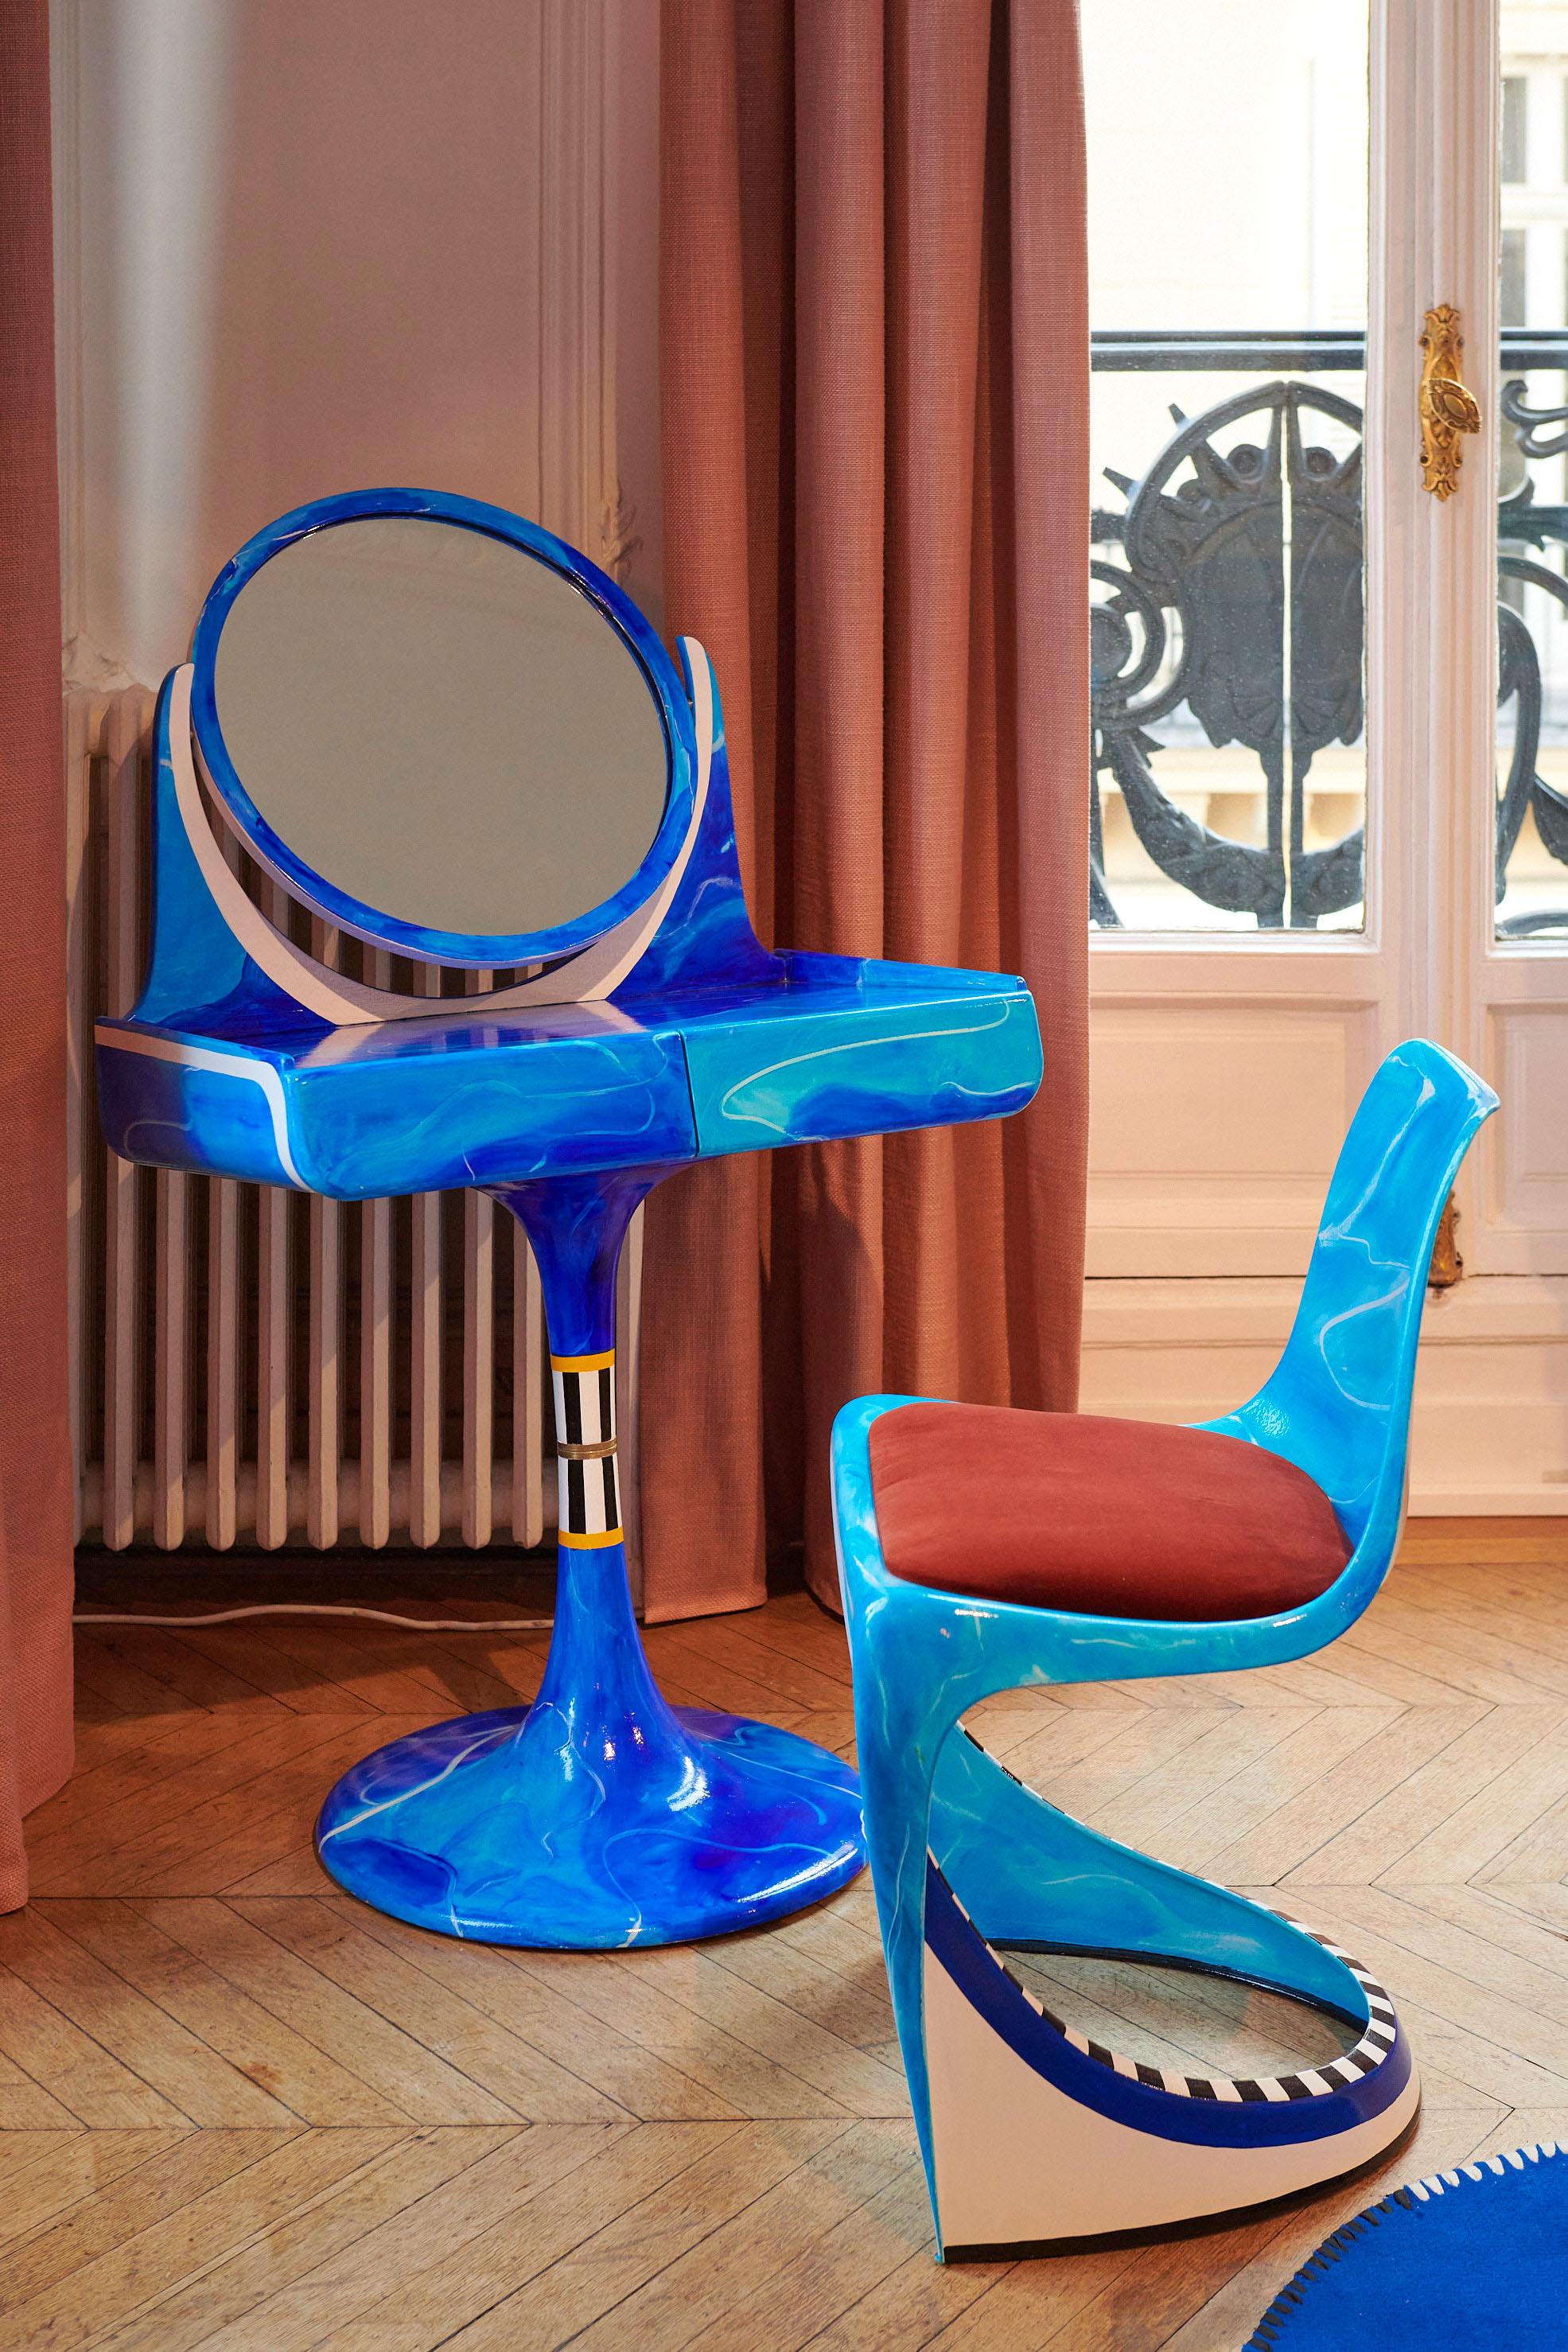 Tulip foot dressing table from the 60 ies, including two drawers and a rotating mirror. Its inclination give it a surrealist look. 

This dressing table was custom made, probably in the 70's
The water takes over the design, this piece is entirely